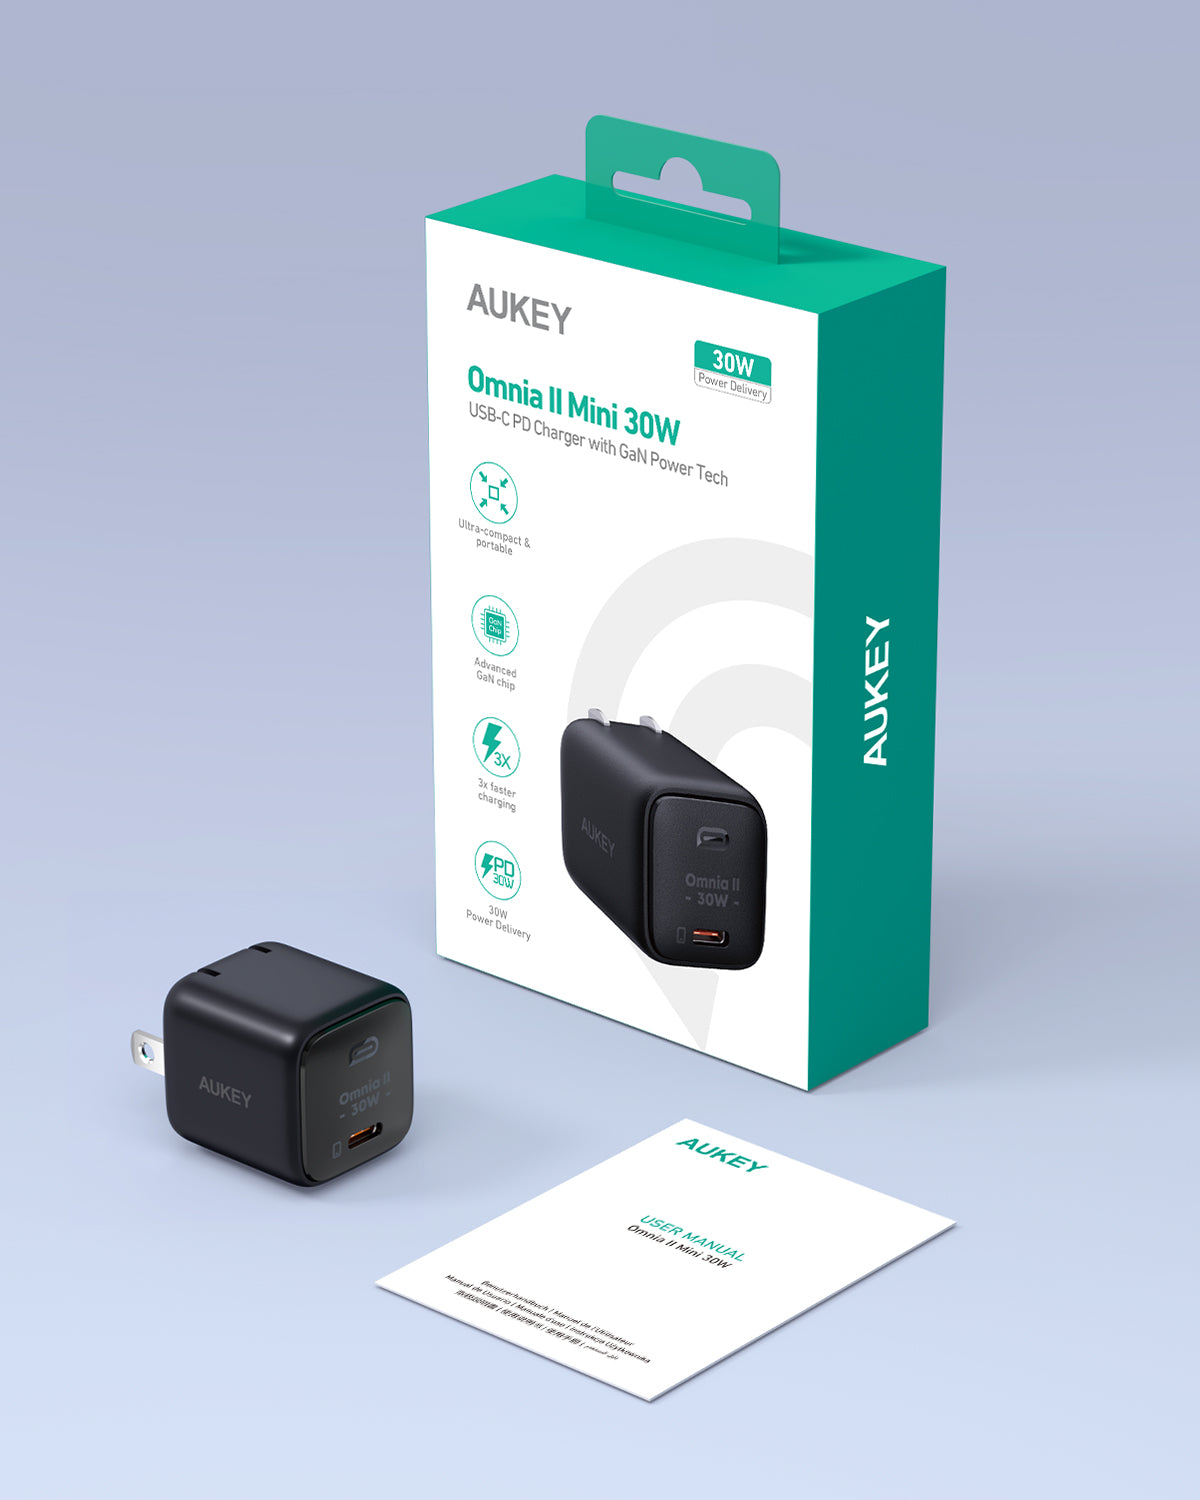 AUKEY PA-B1L VoltApex II Mini 30W USB-C PD Charger with GaN Power Tech